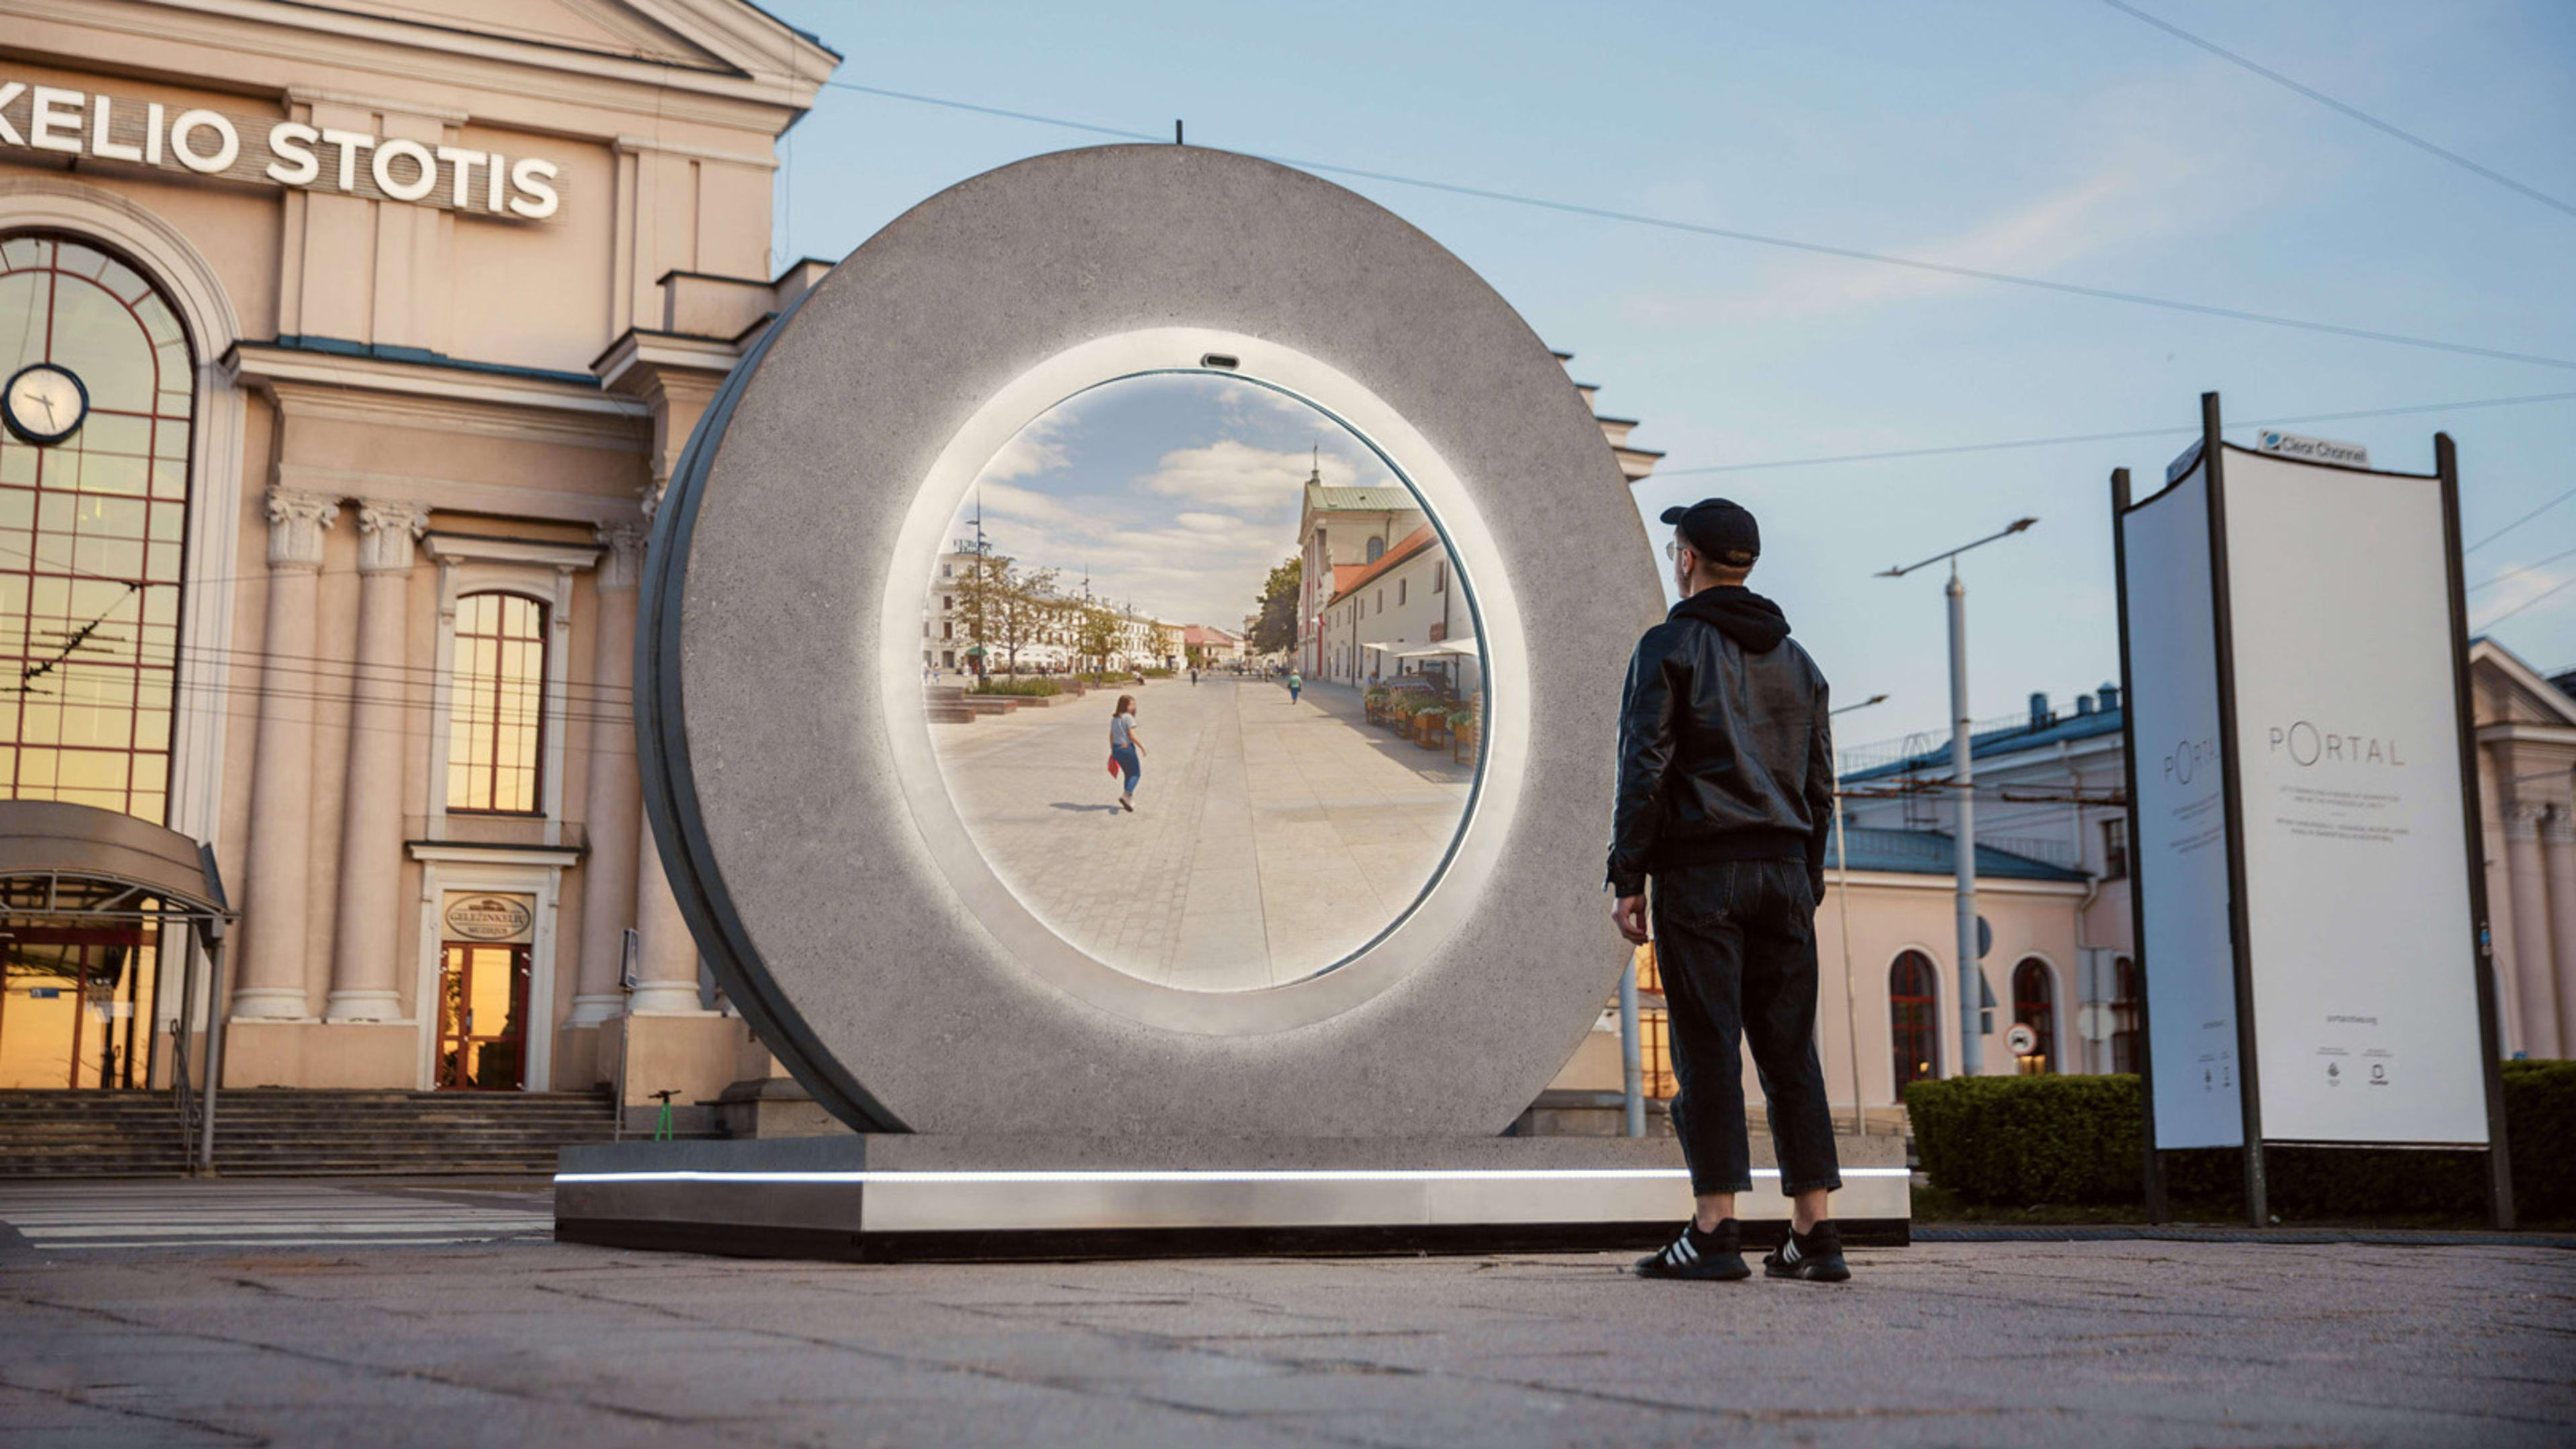 This magical portal connects people across two cities